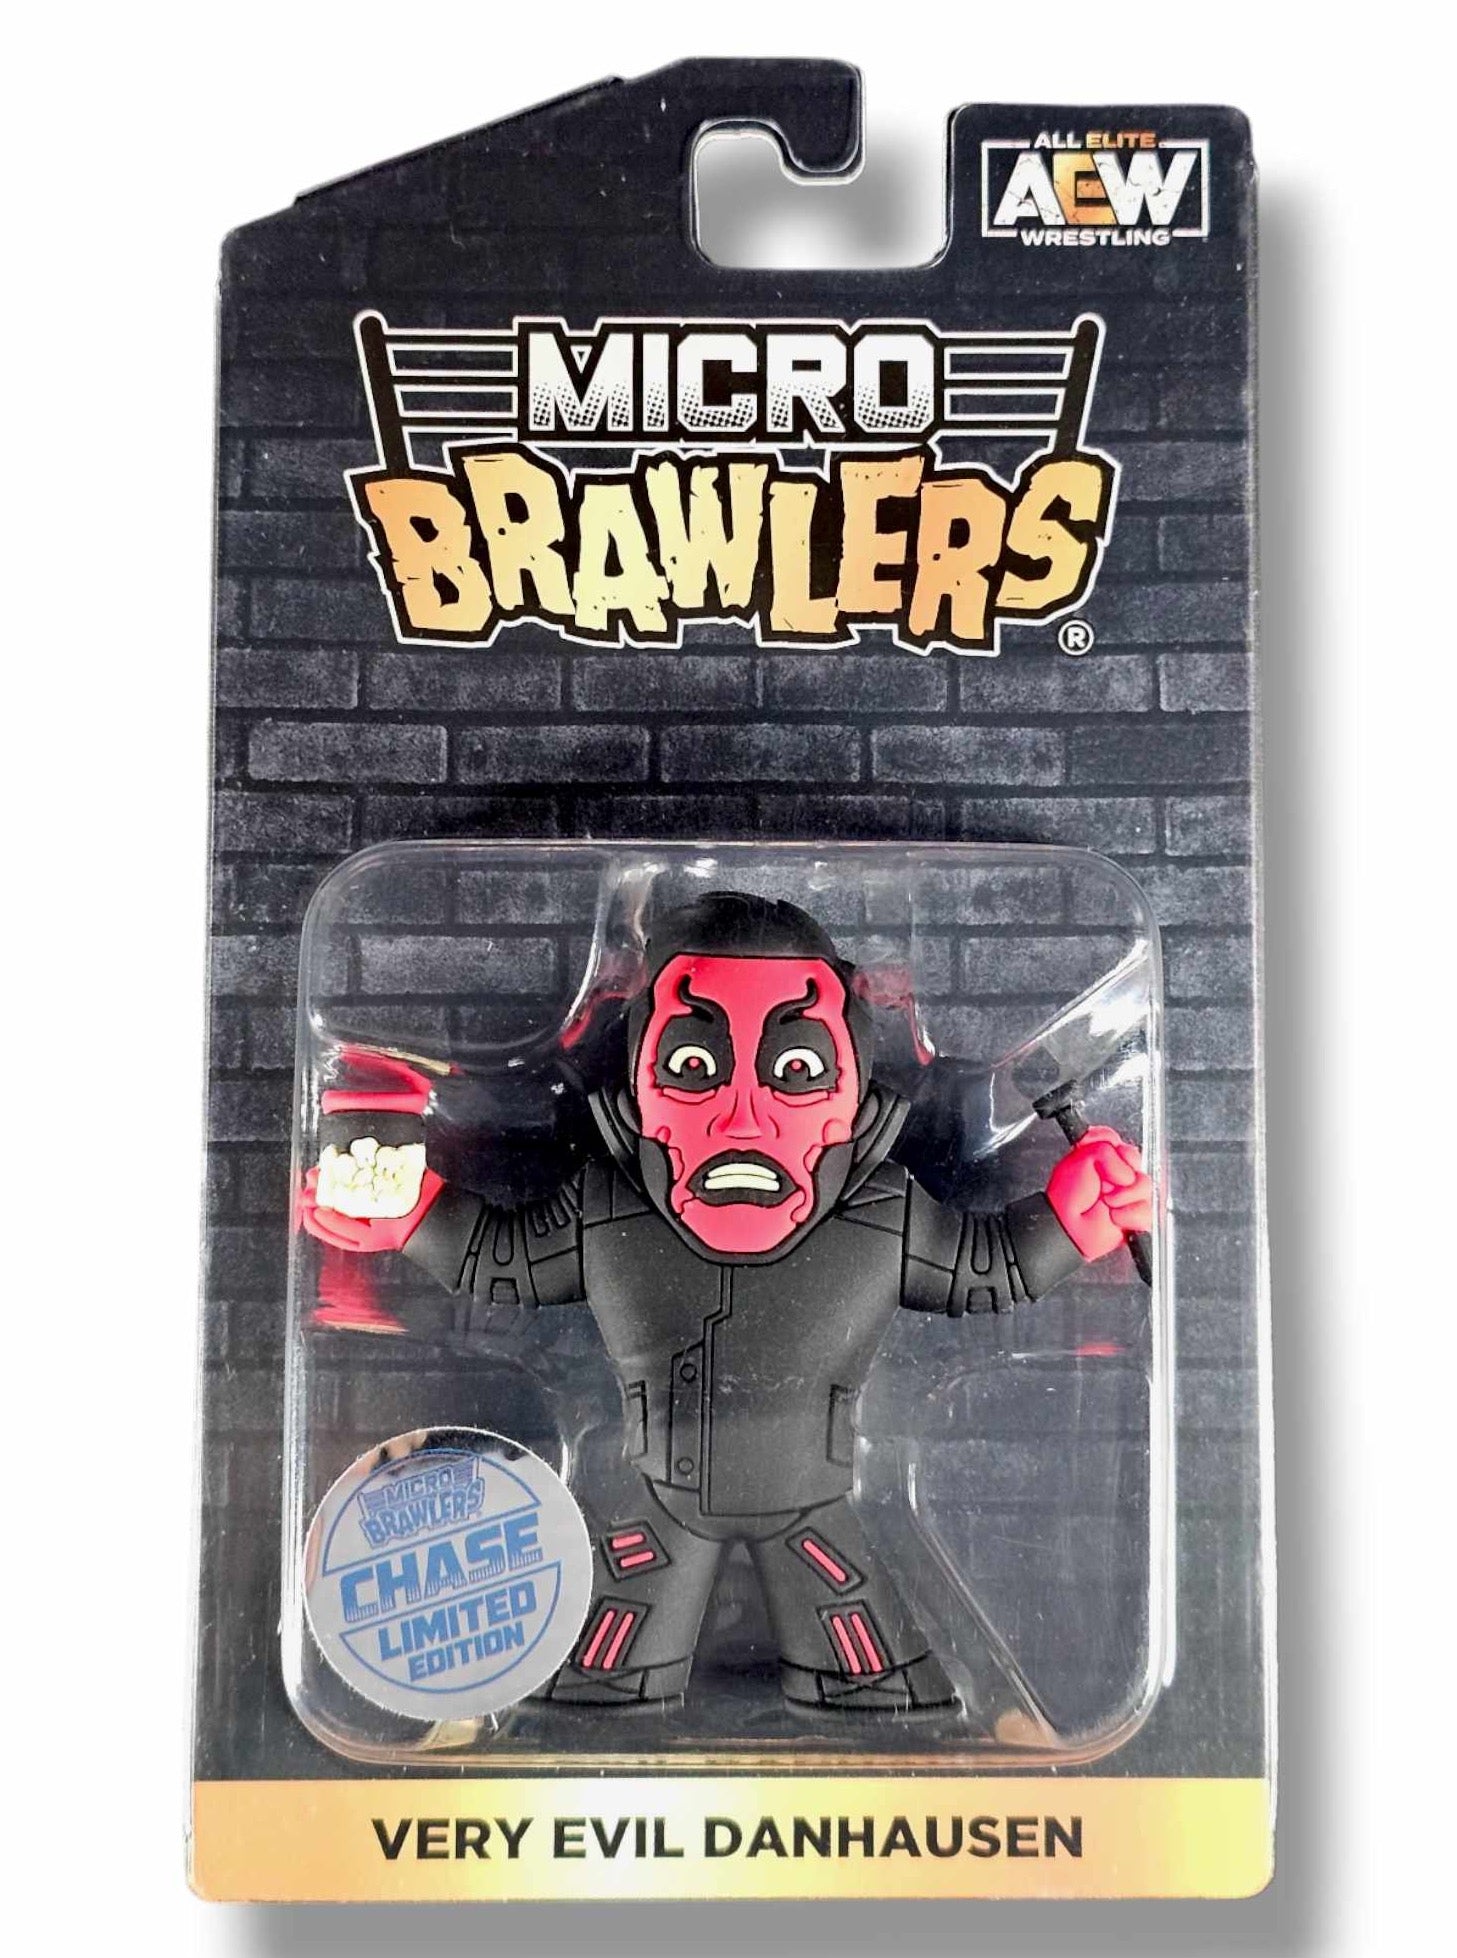 2023 Pro Wrestling Tees Micro Brawlers Danhausen with Cape [Color